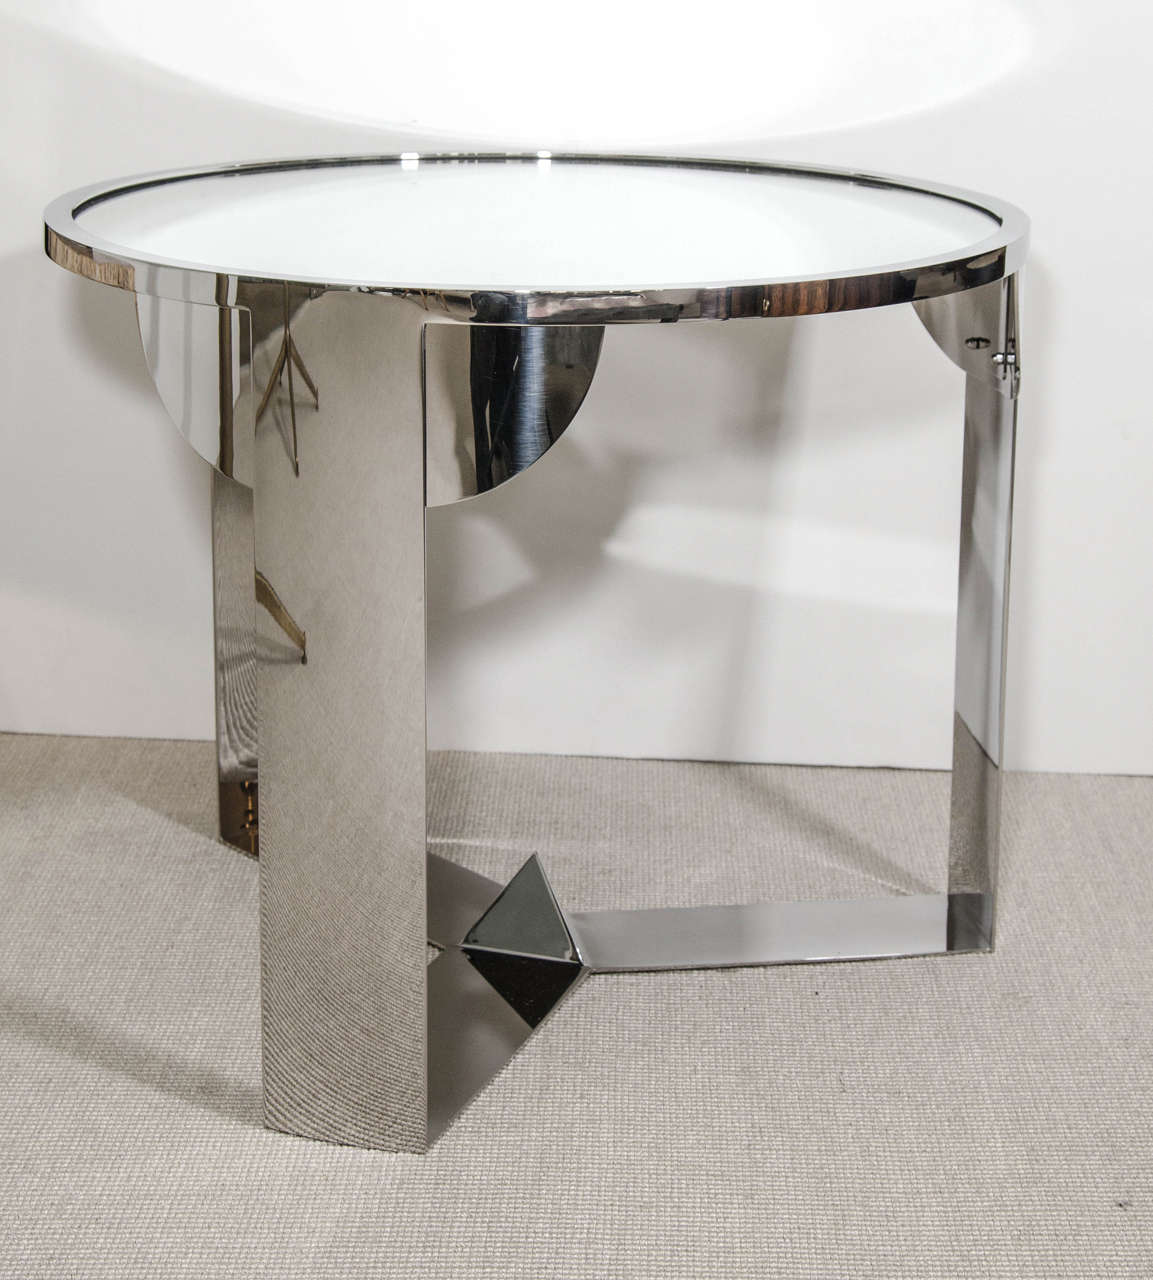 American Limited Edition Constructivist Inspired Custom-Made Table by Eric Appel, USA For Sale